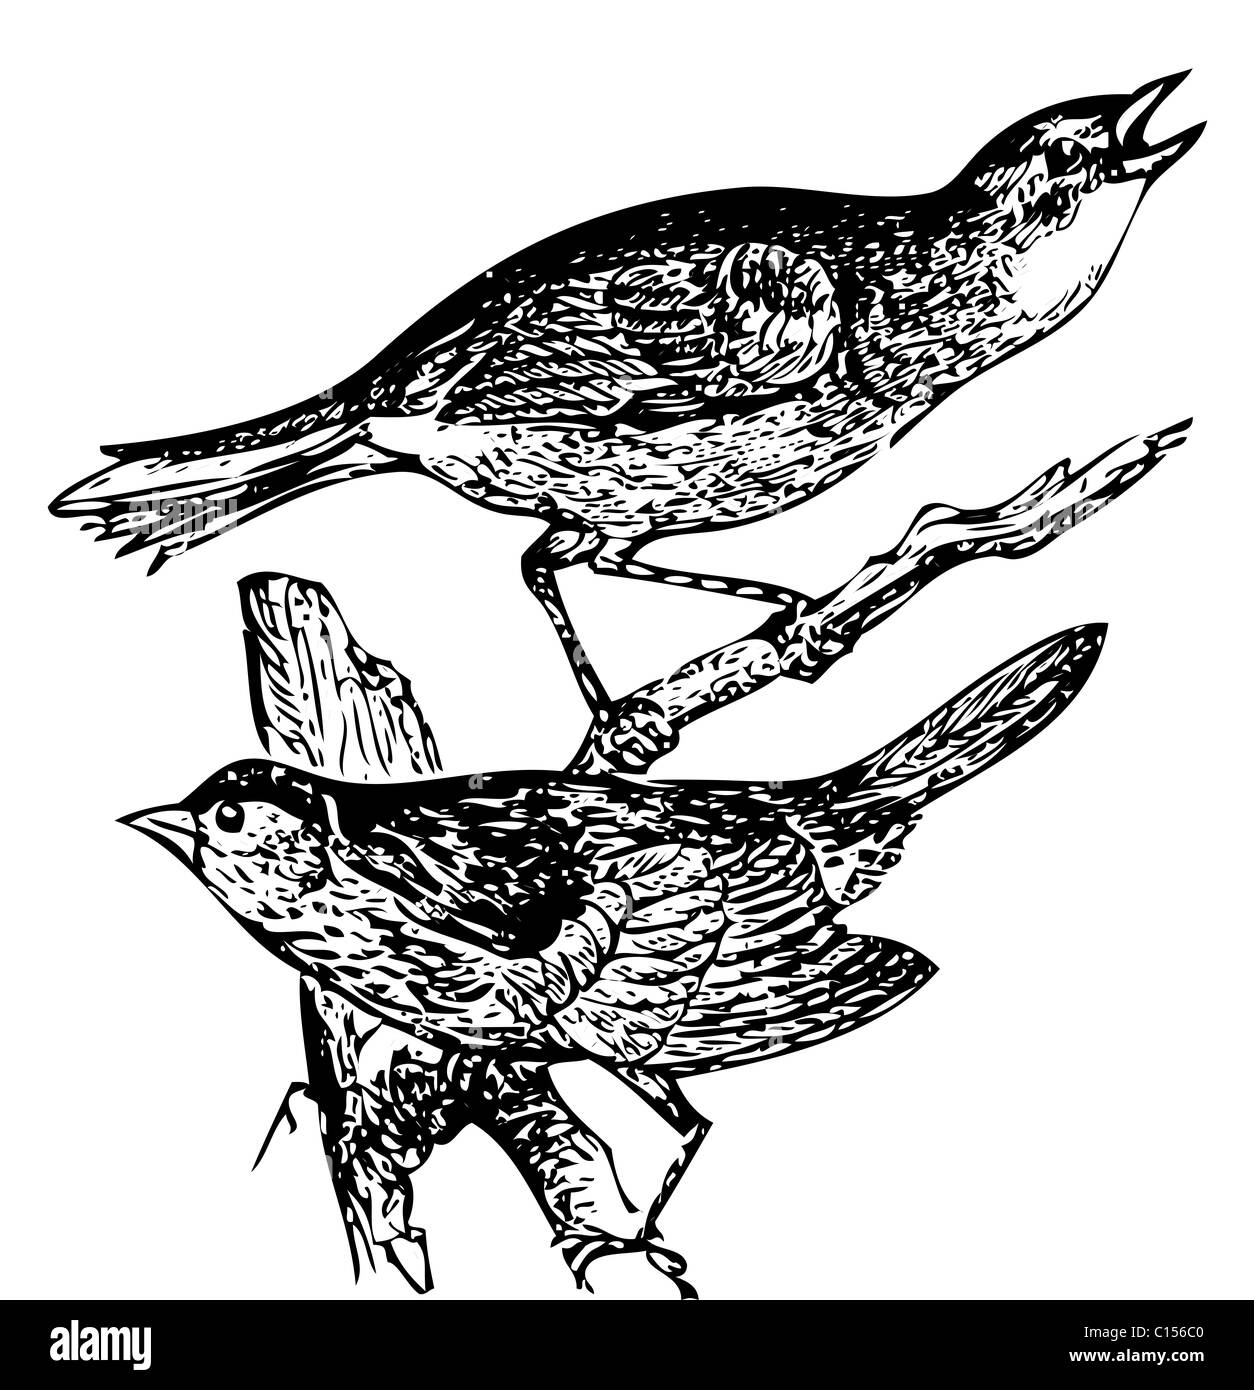 Old engraved illustration of a Seaside sparrow and Lincoln's sparrow or zonotrichia lincolnii and ammodromus maritimus, isolated on white. Live traced. From the Trousset encyclopedia, Paris 1886 - 1891. Stock Photo